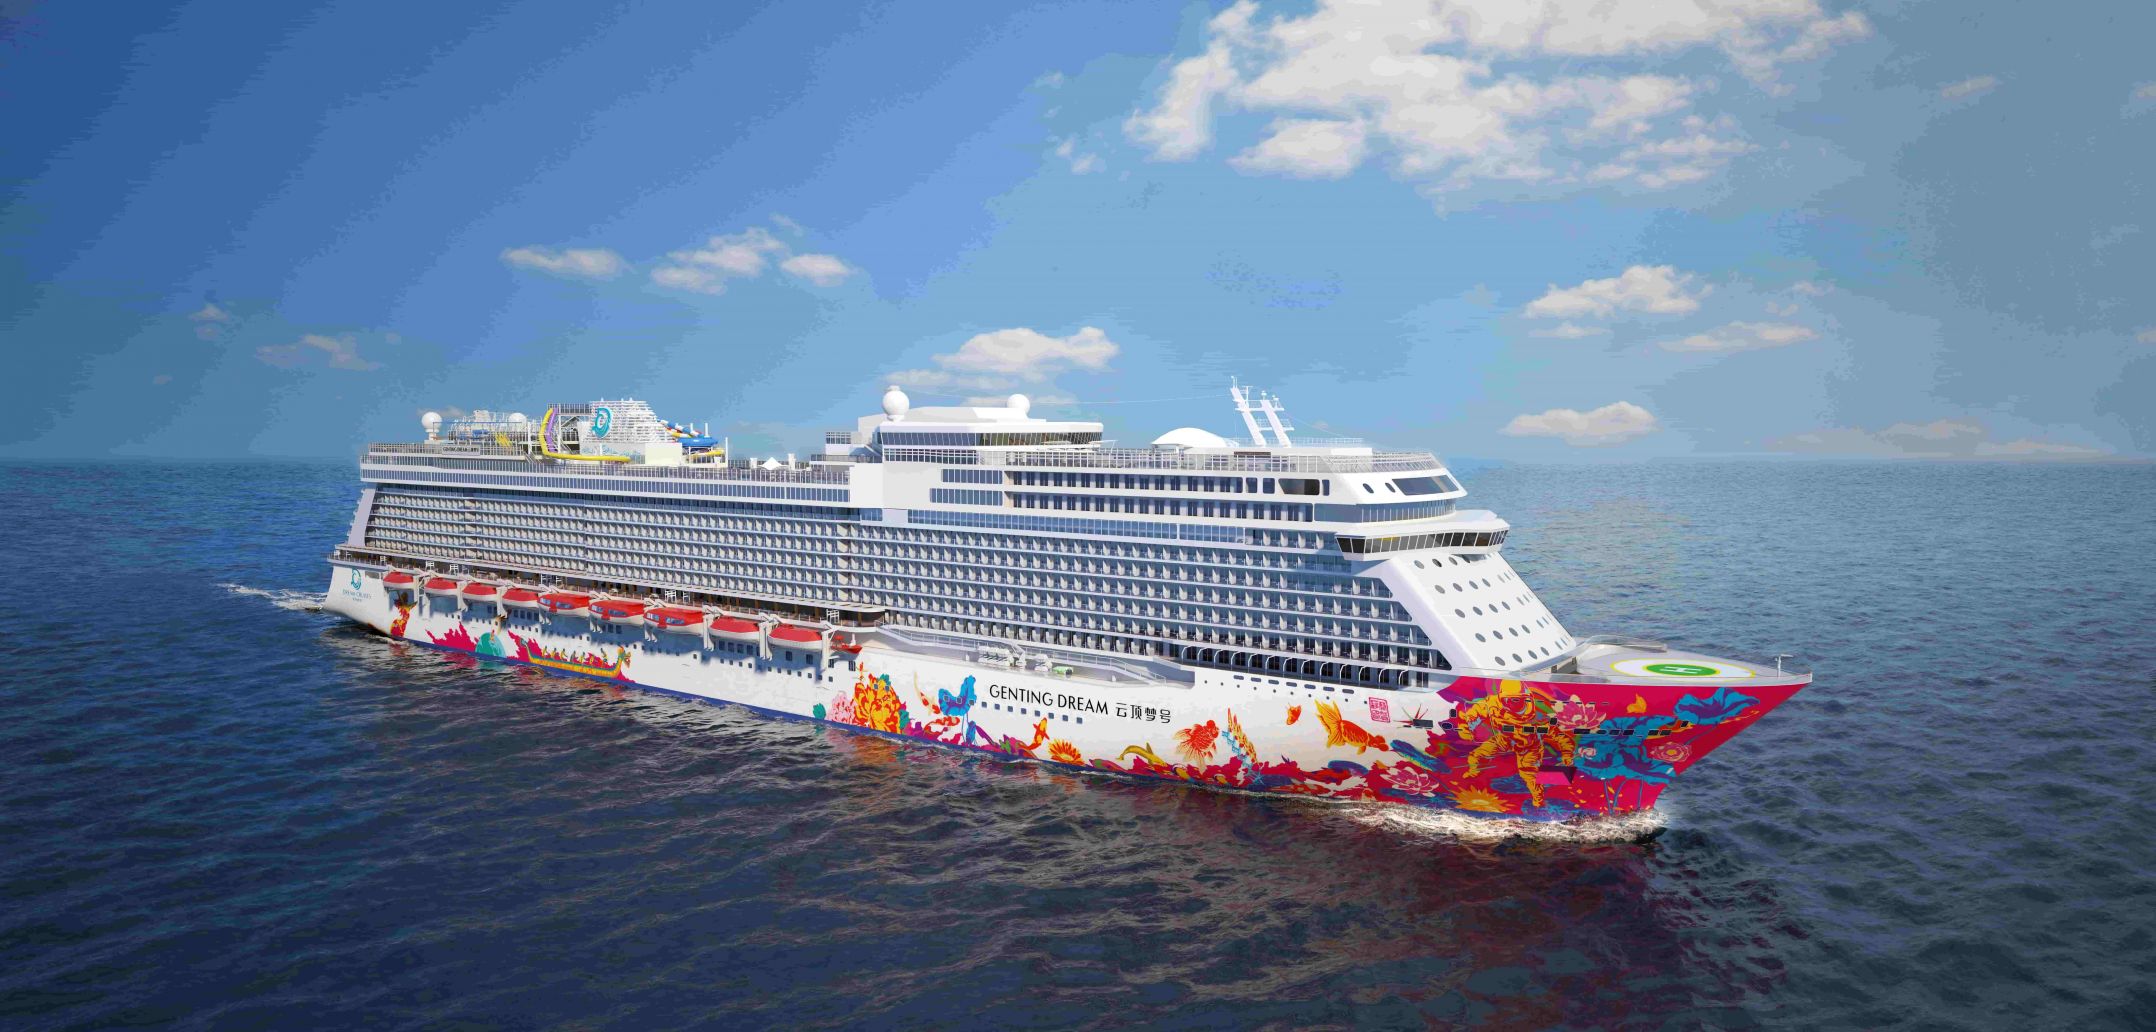 FirstEver Asian Luxury Cruise Line Dream Cruises Officially Launches